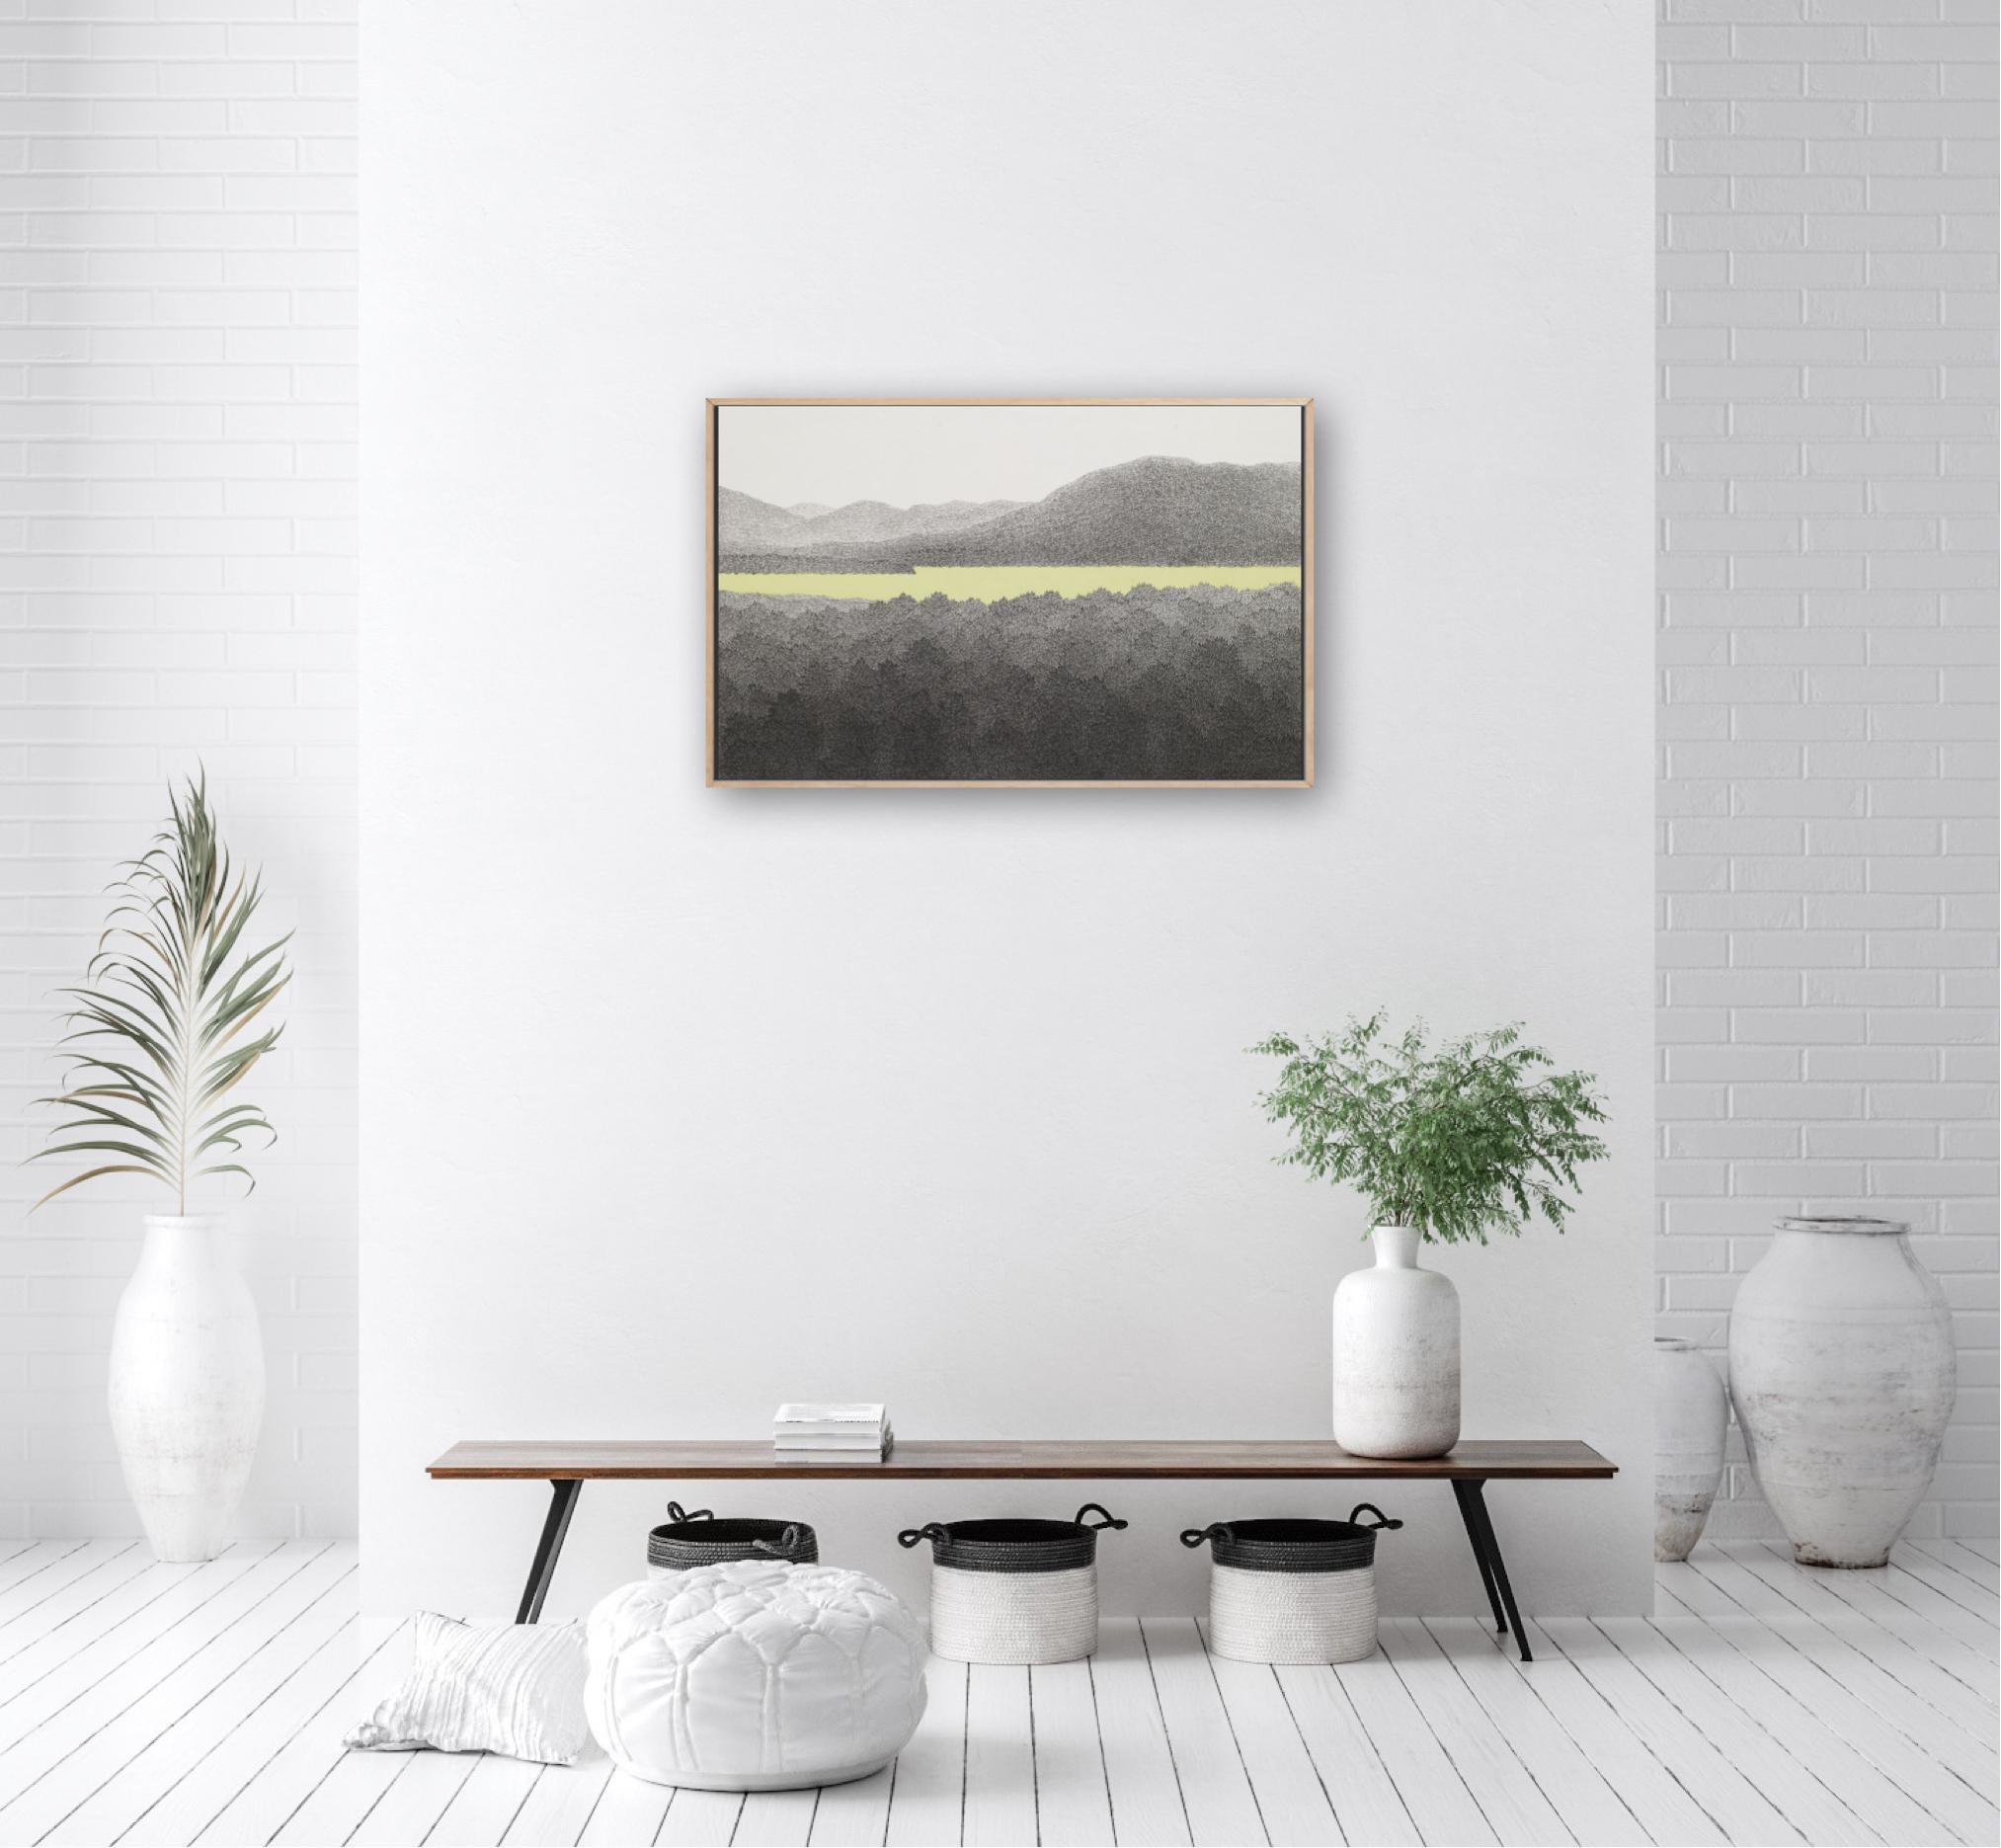 Oreum (Volcanic Cone) - Gray Landscape Painting by Hanjeong Lee